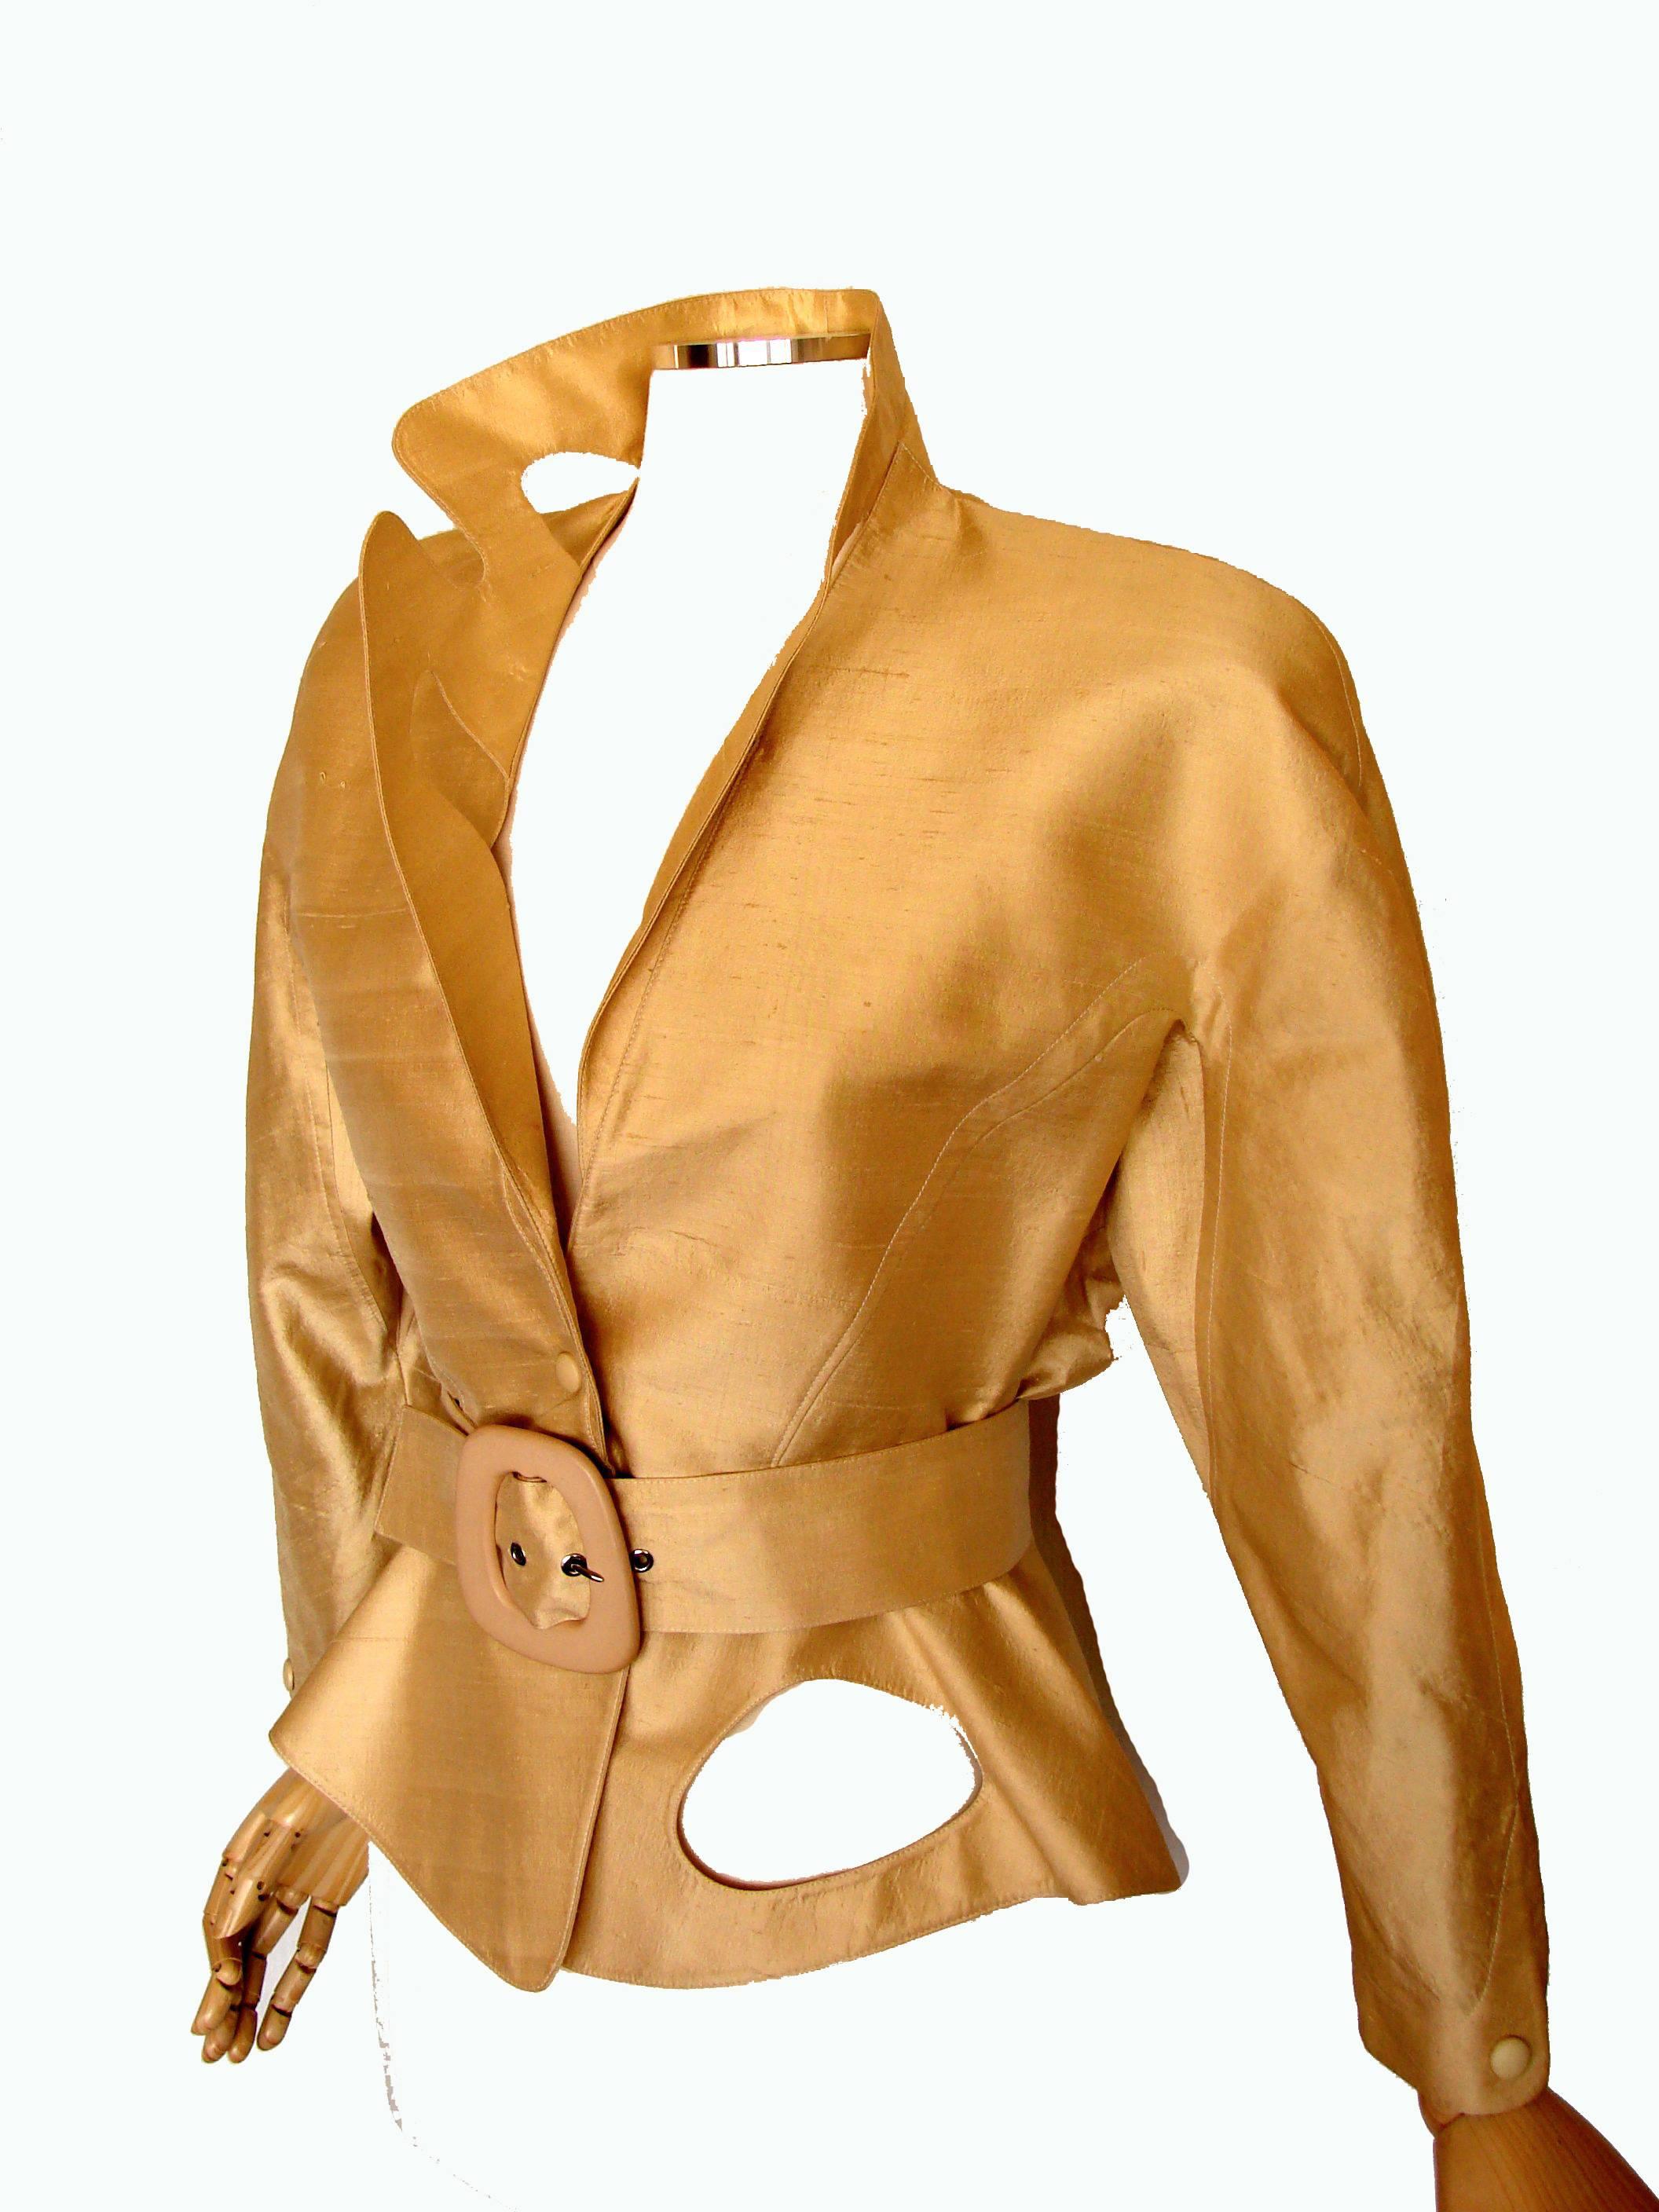 This incredible jacket & belt set was designed by Thierry Mugler Paris in the early 1980s.  Made from a duopioni silk fabric in a champagne gold shade, this jacket features one notched collar and the other shawl shaped, as well as abstract cut